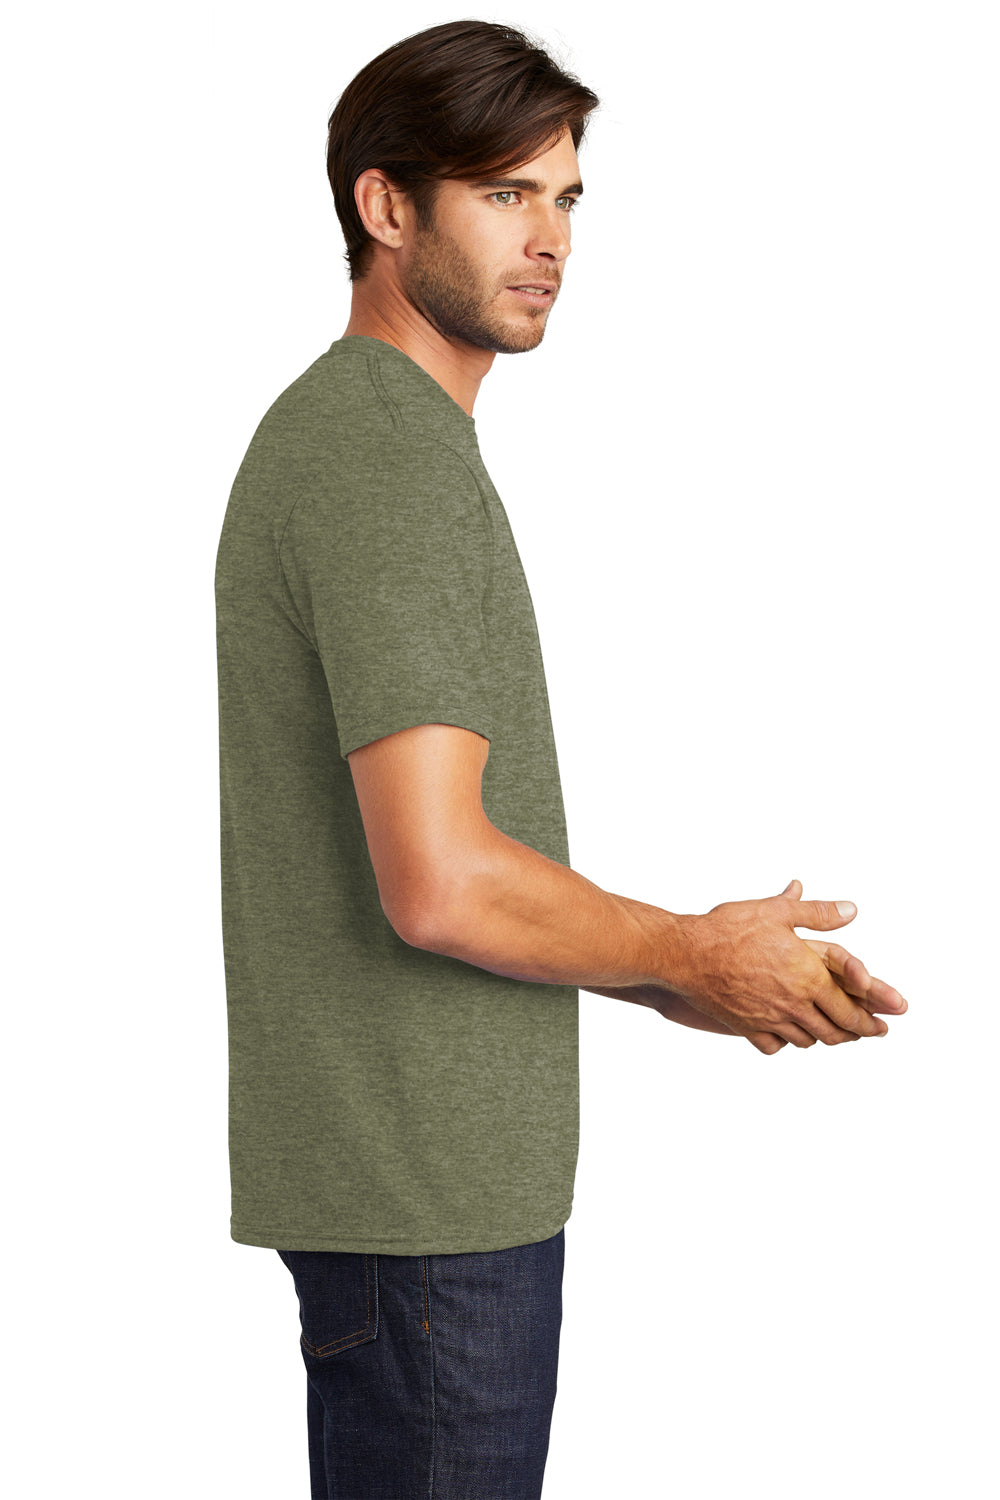 District DM130 Mens Perfect Tri Short Sleeve Crewneck T-Shirt Military Green Frost Side